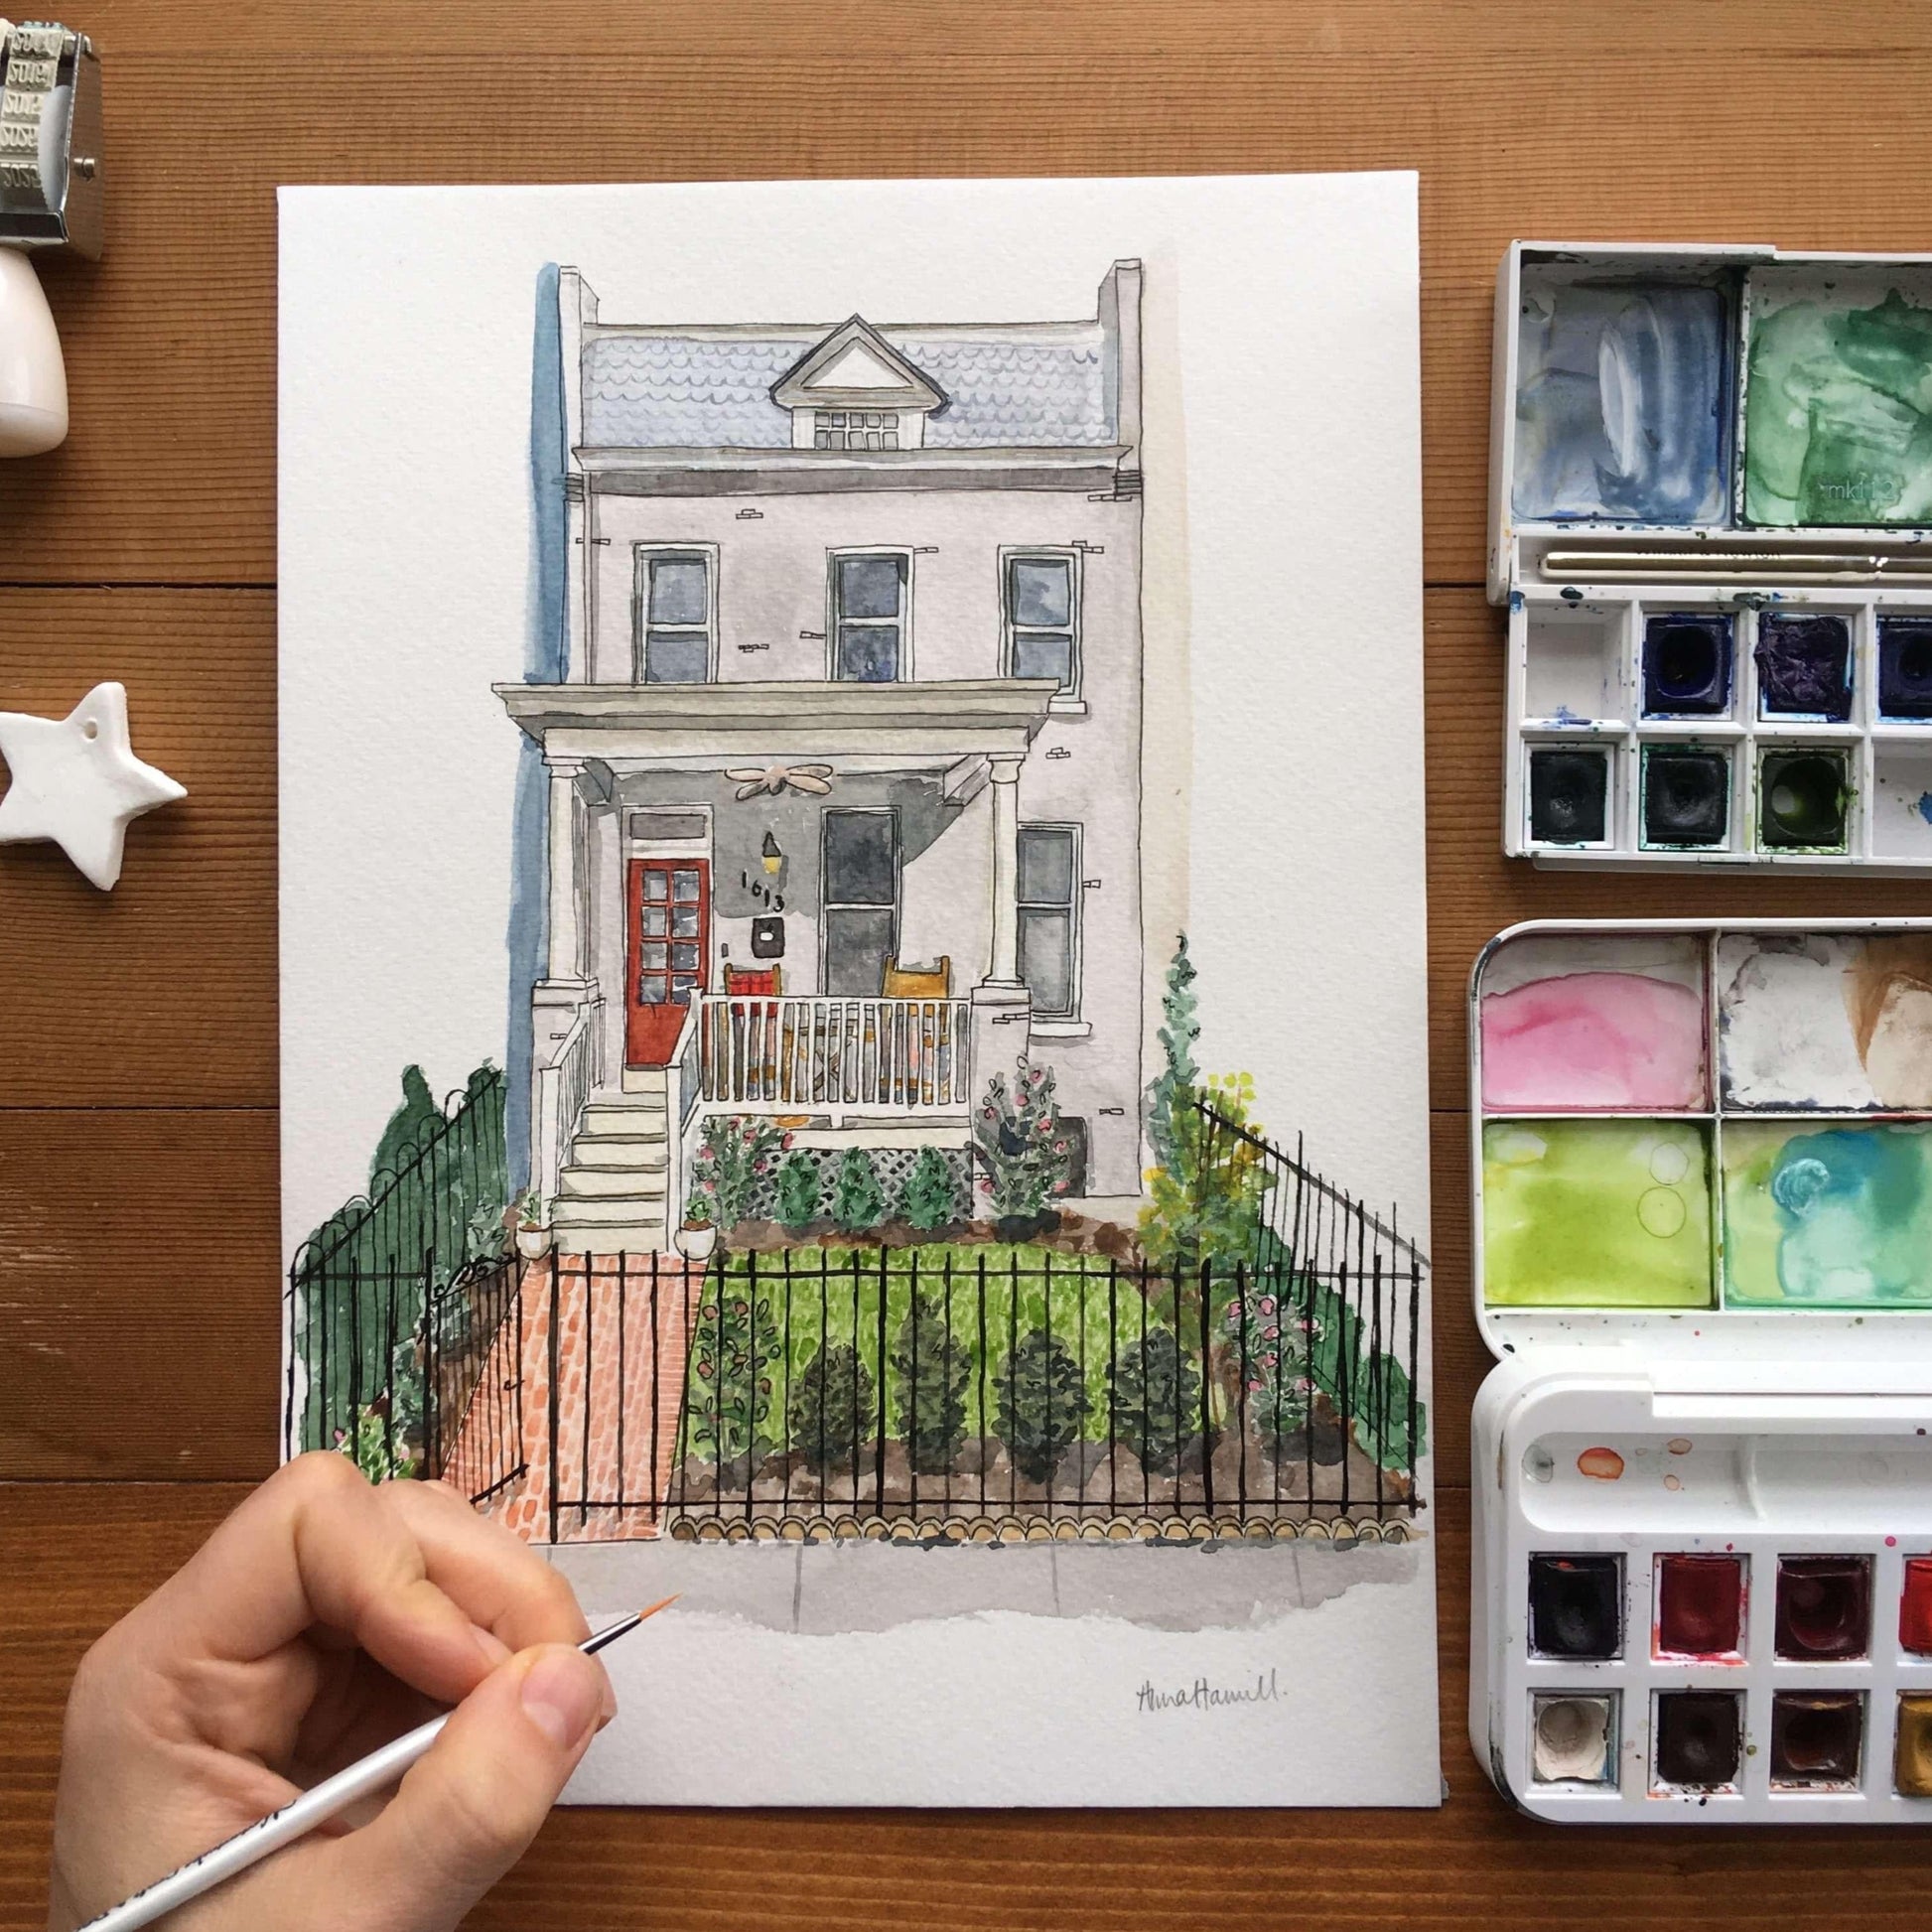 Personalised gift of a custom house portrait painted with watercolour